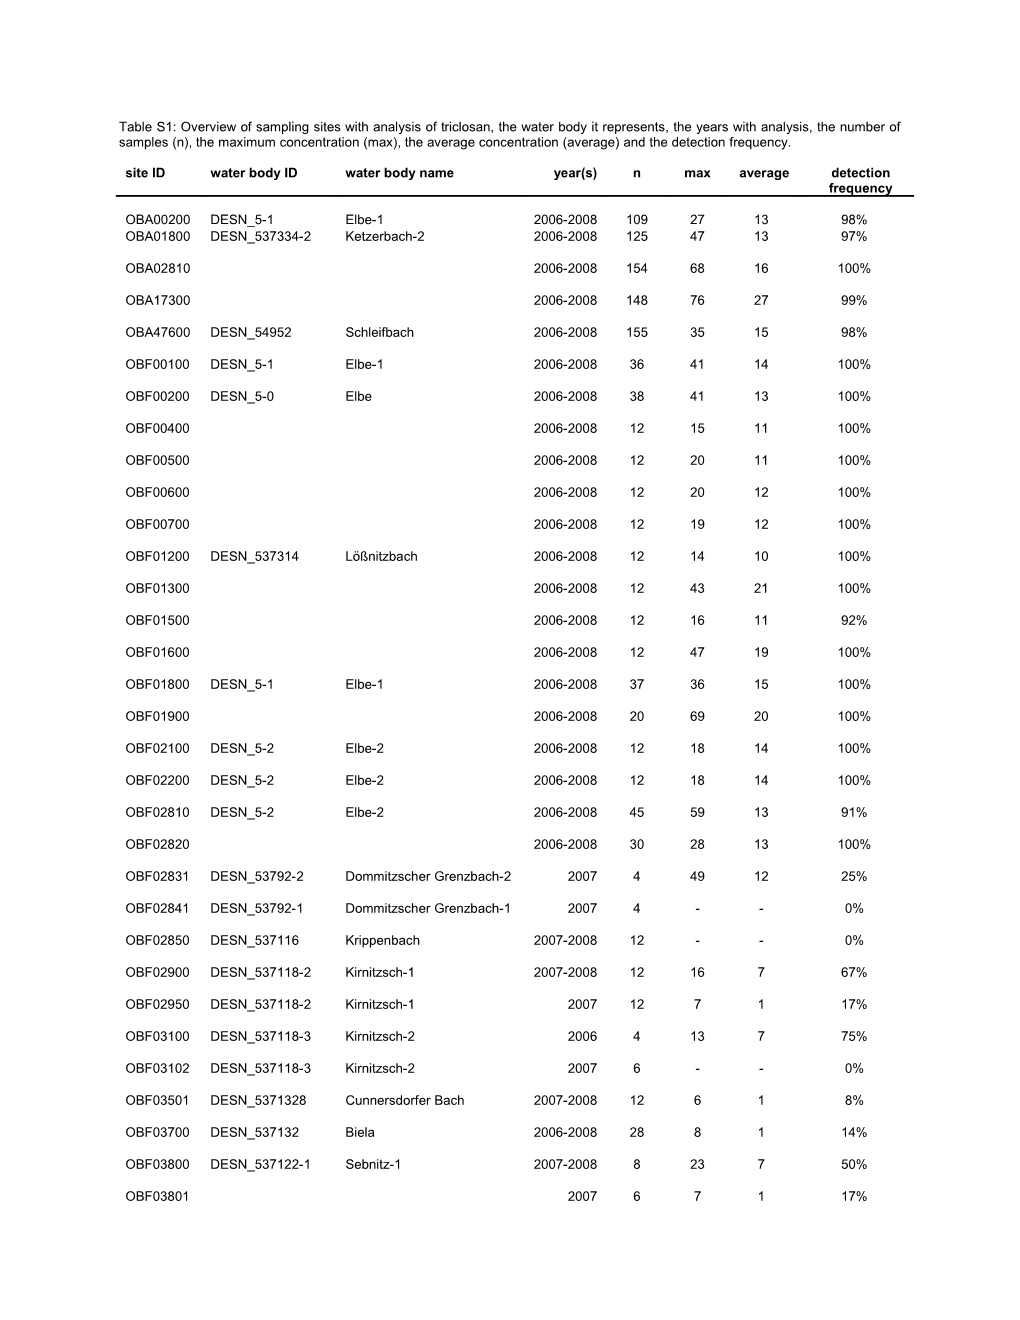 Table S1: Overview of Sampling Sites with Analysis of Triclosan, the Water Body It Represents